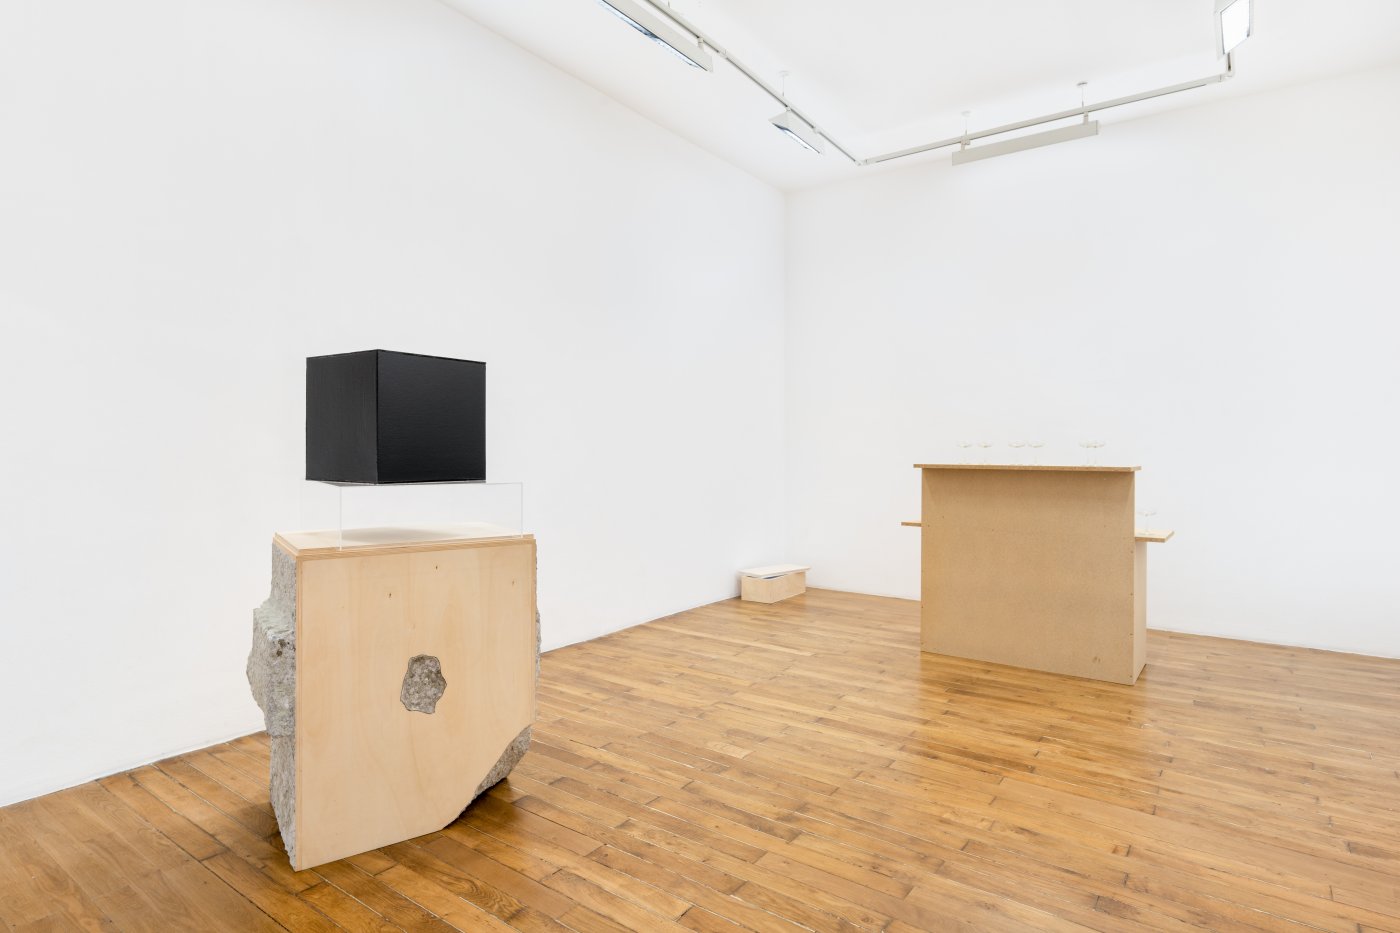 Installation image for Heimo Zobernig, at Galerie Chantal Crousel